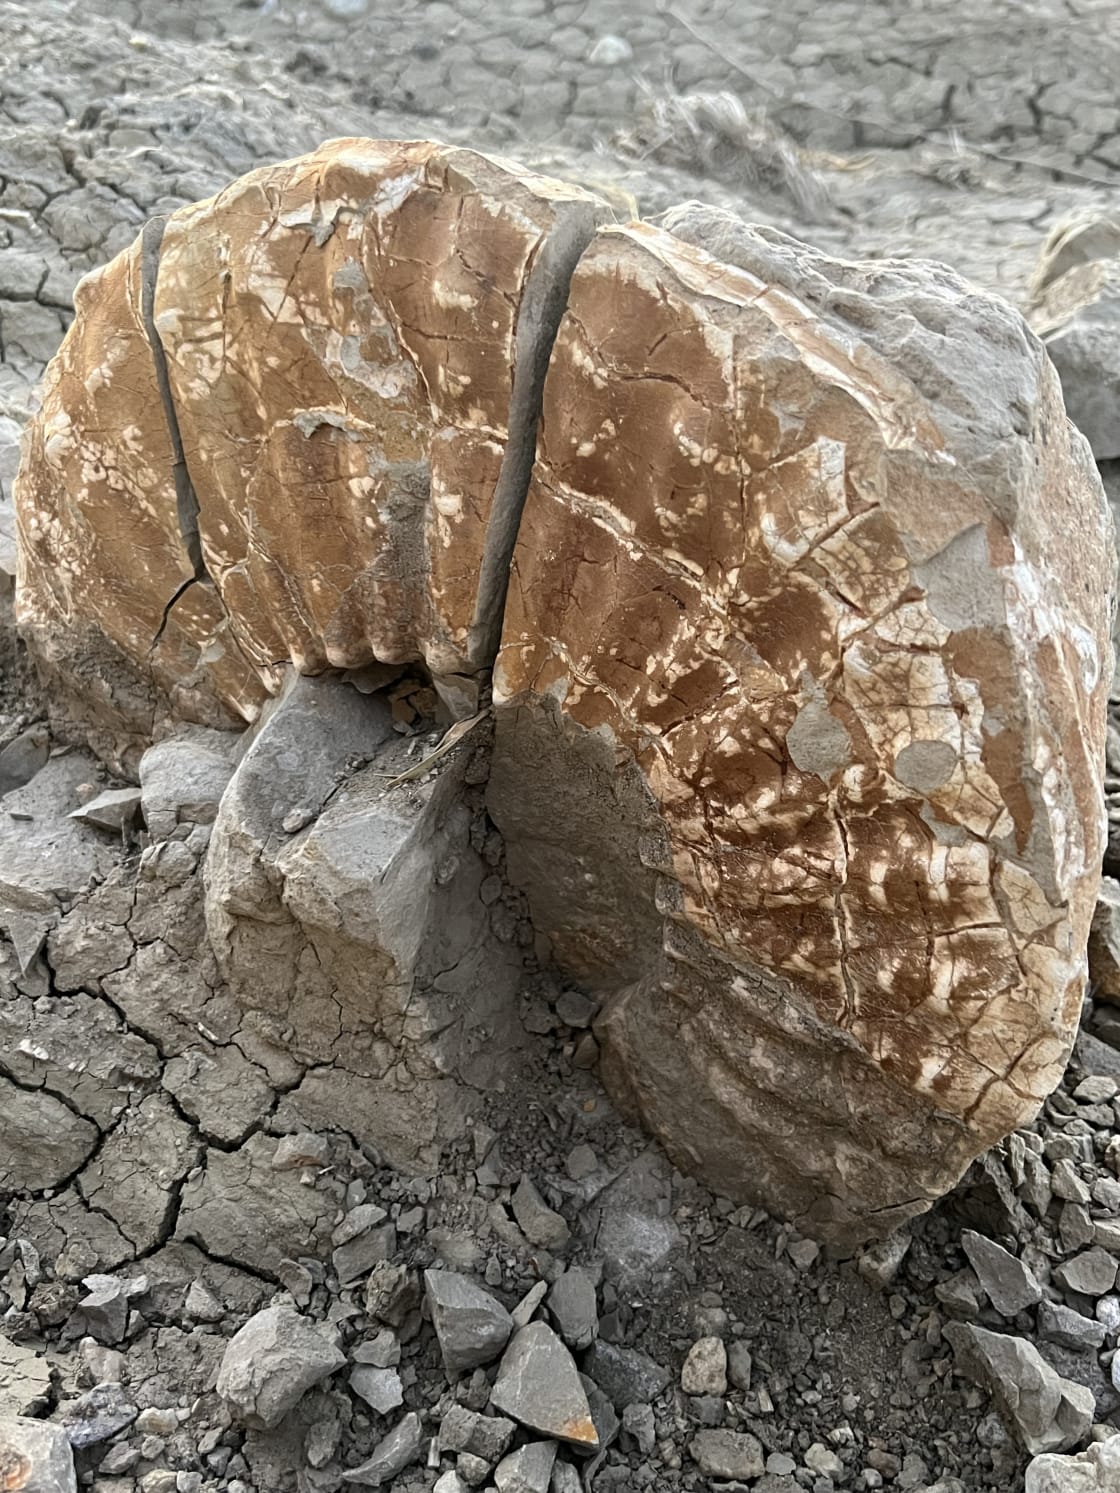 Ammonite fossil found on property